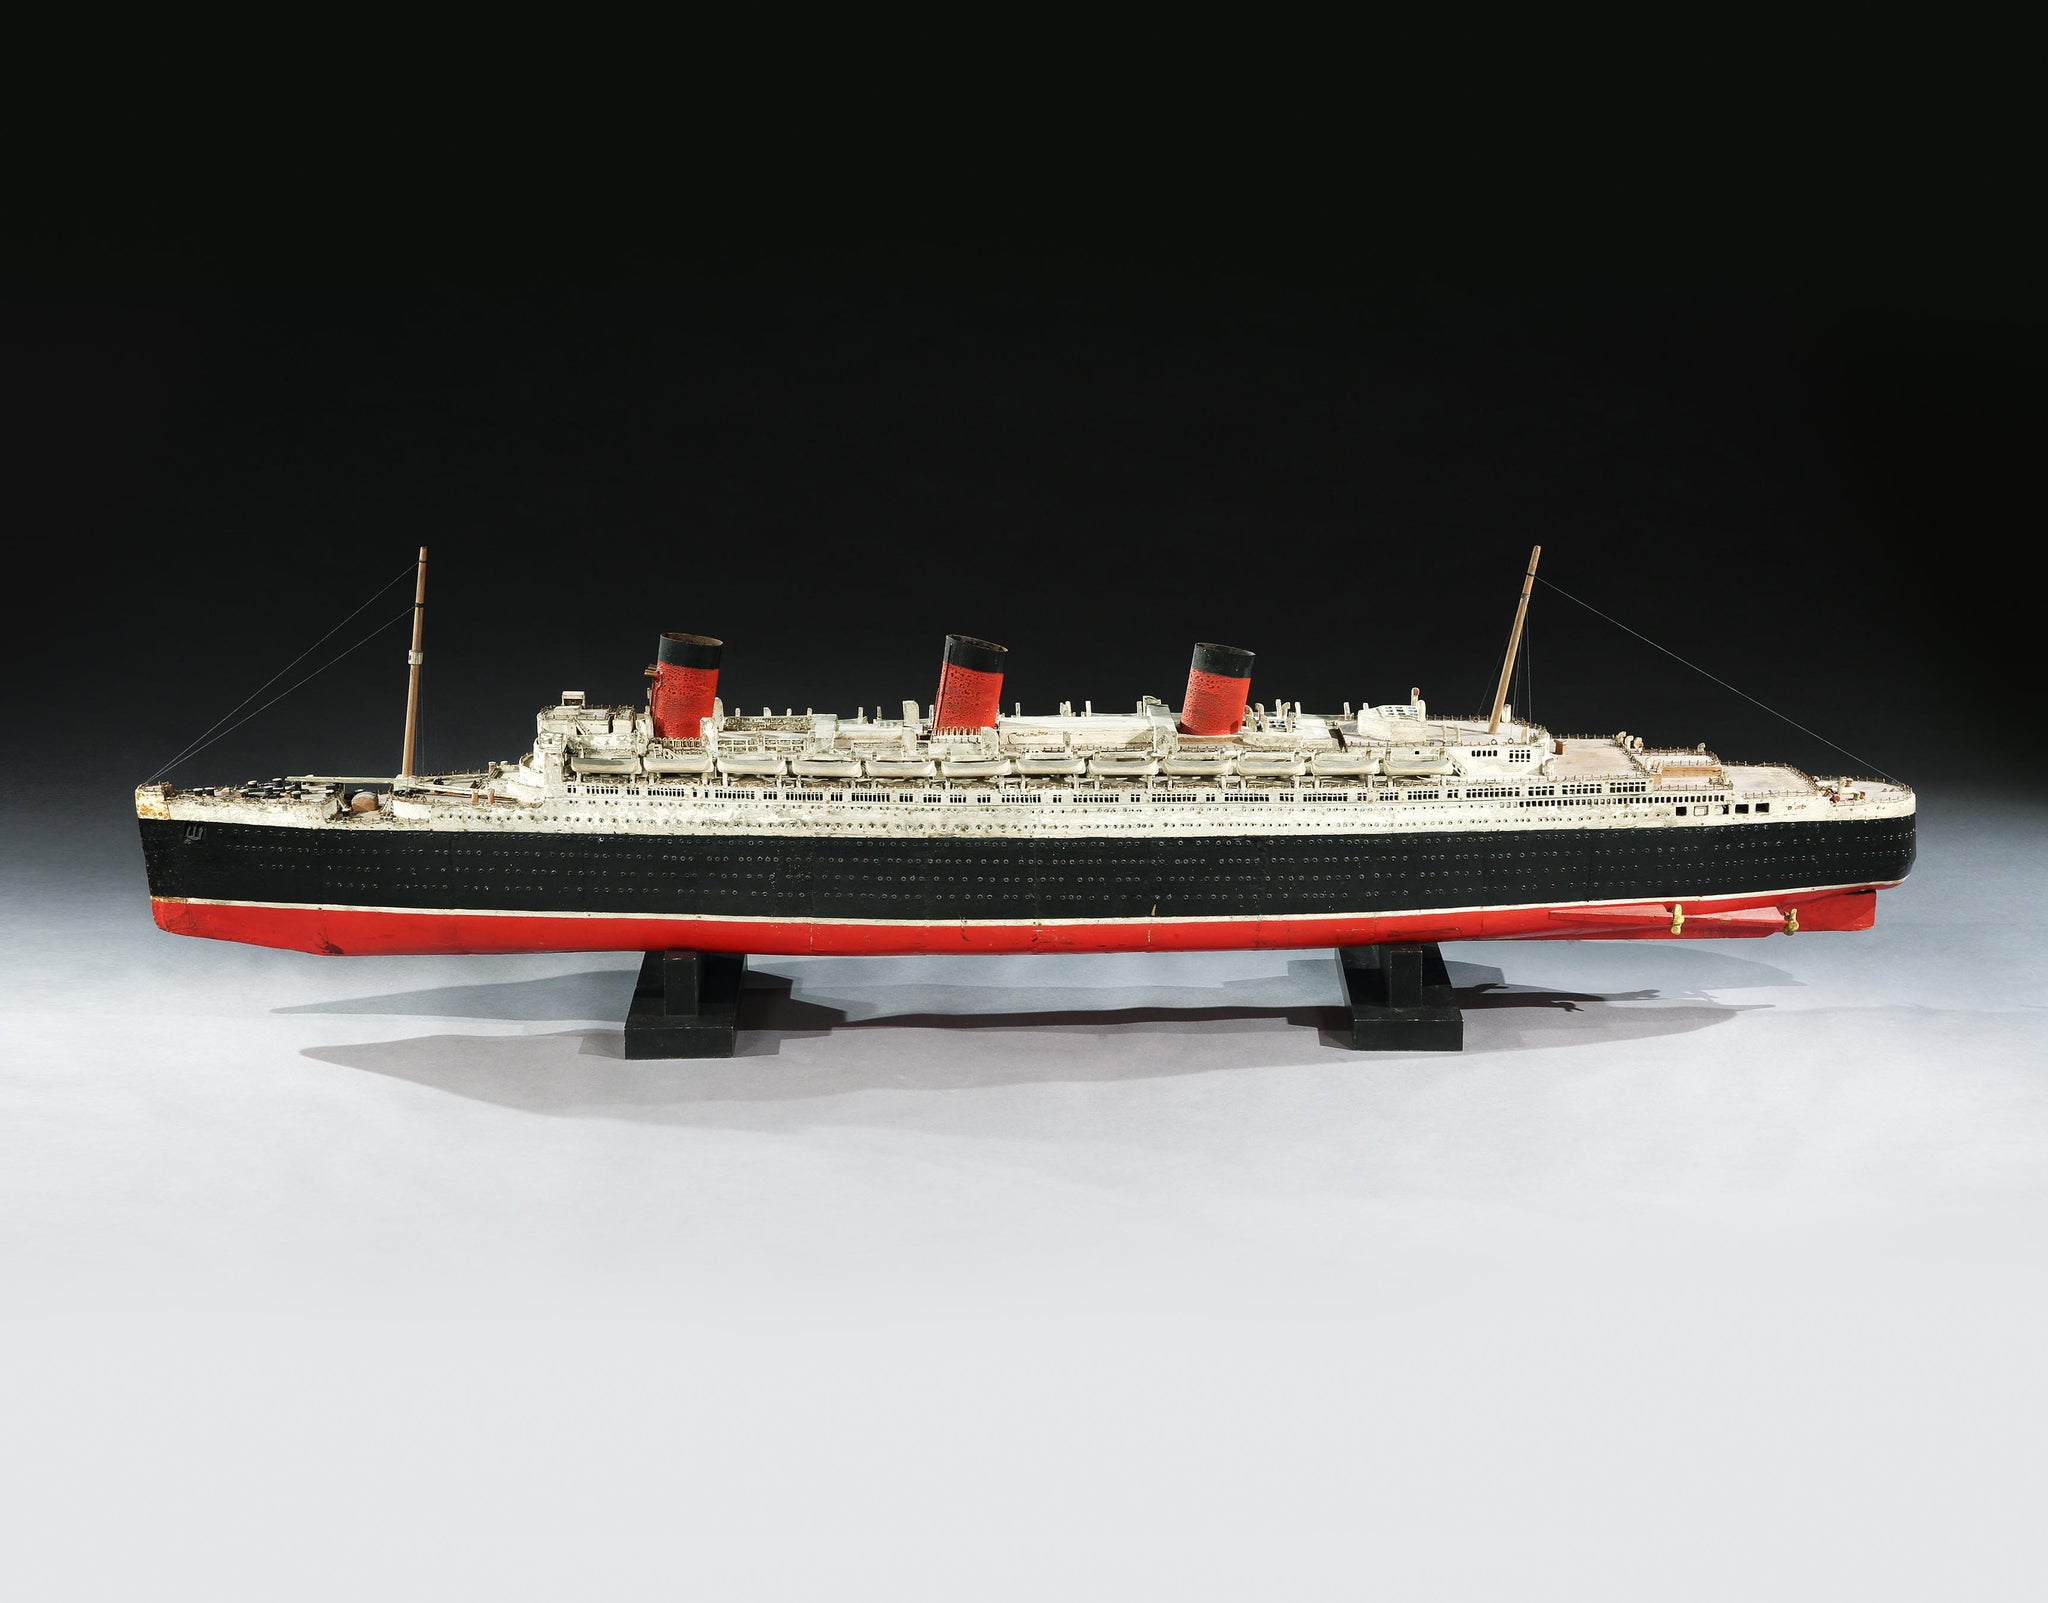 Magnificent Large-Scale Folk Art Model of An Ocean Liner